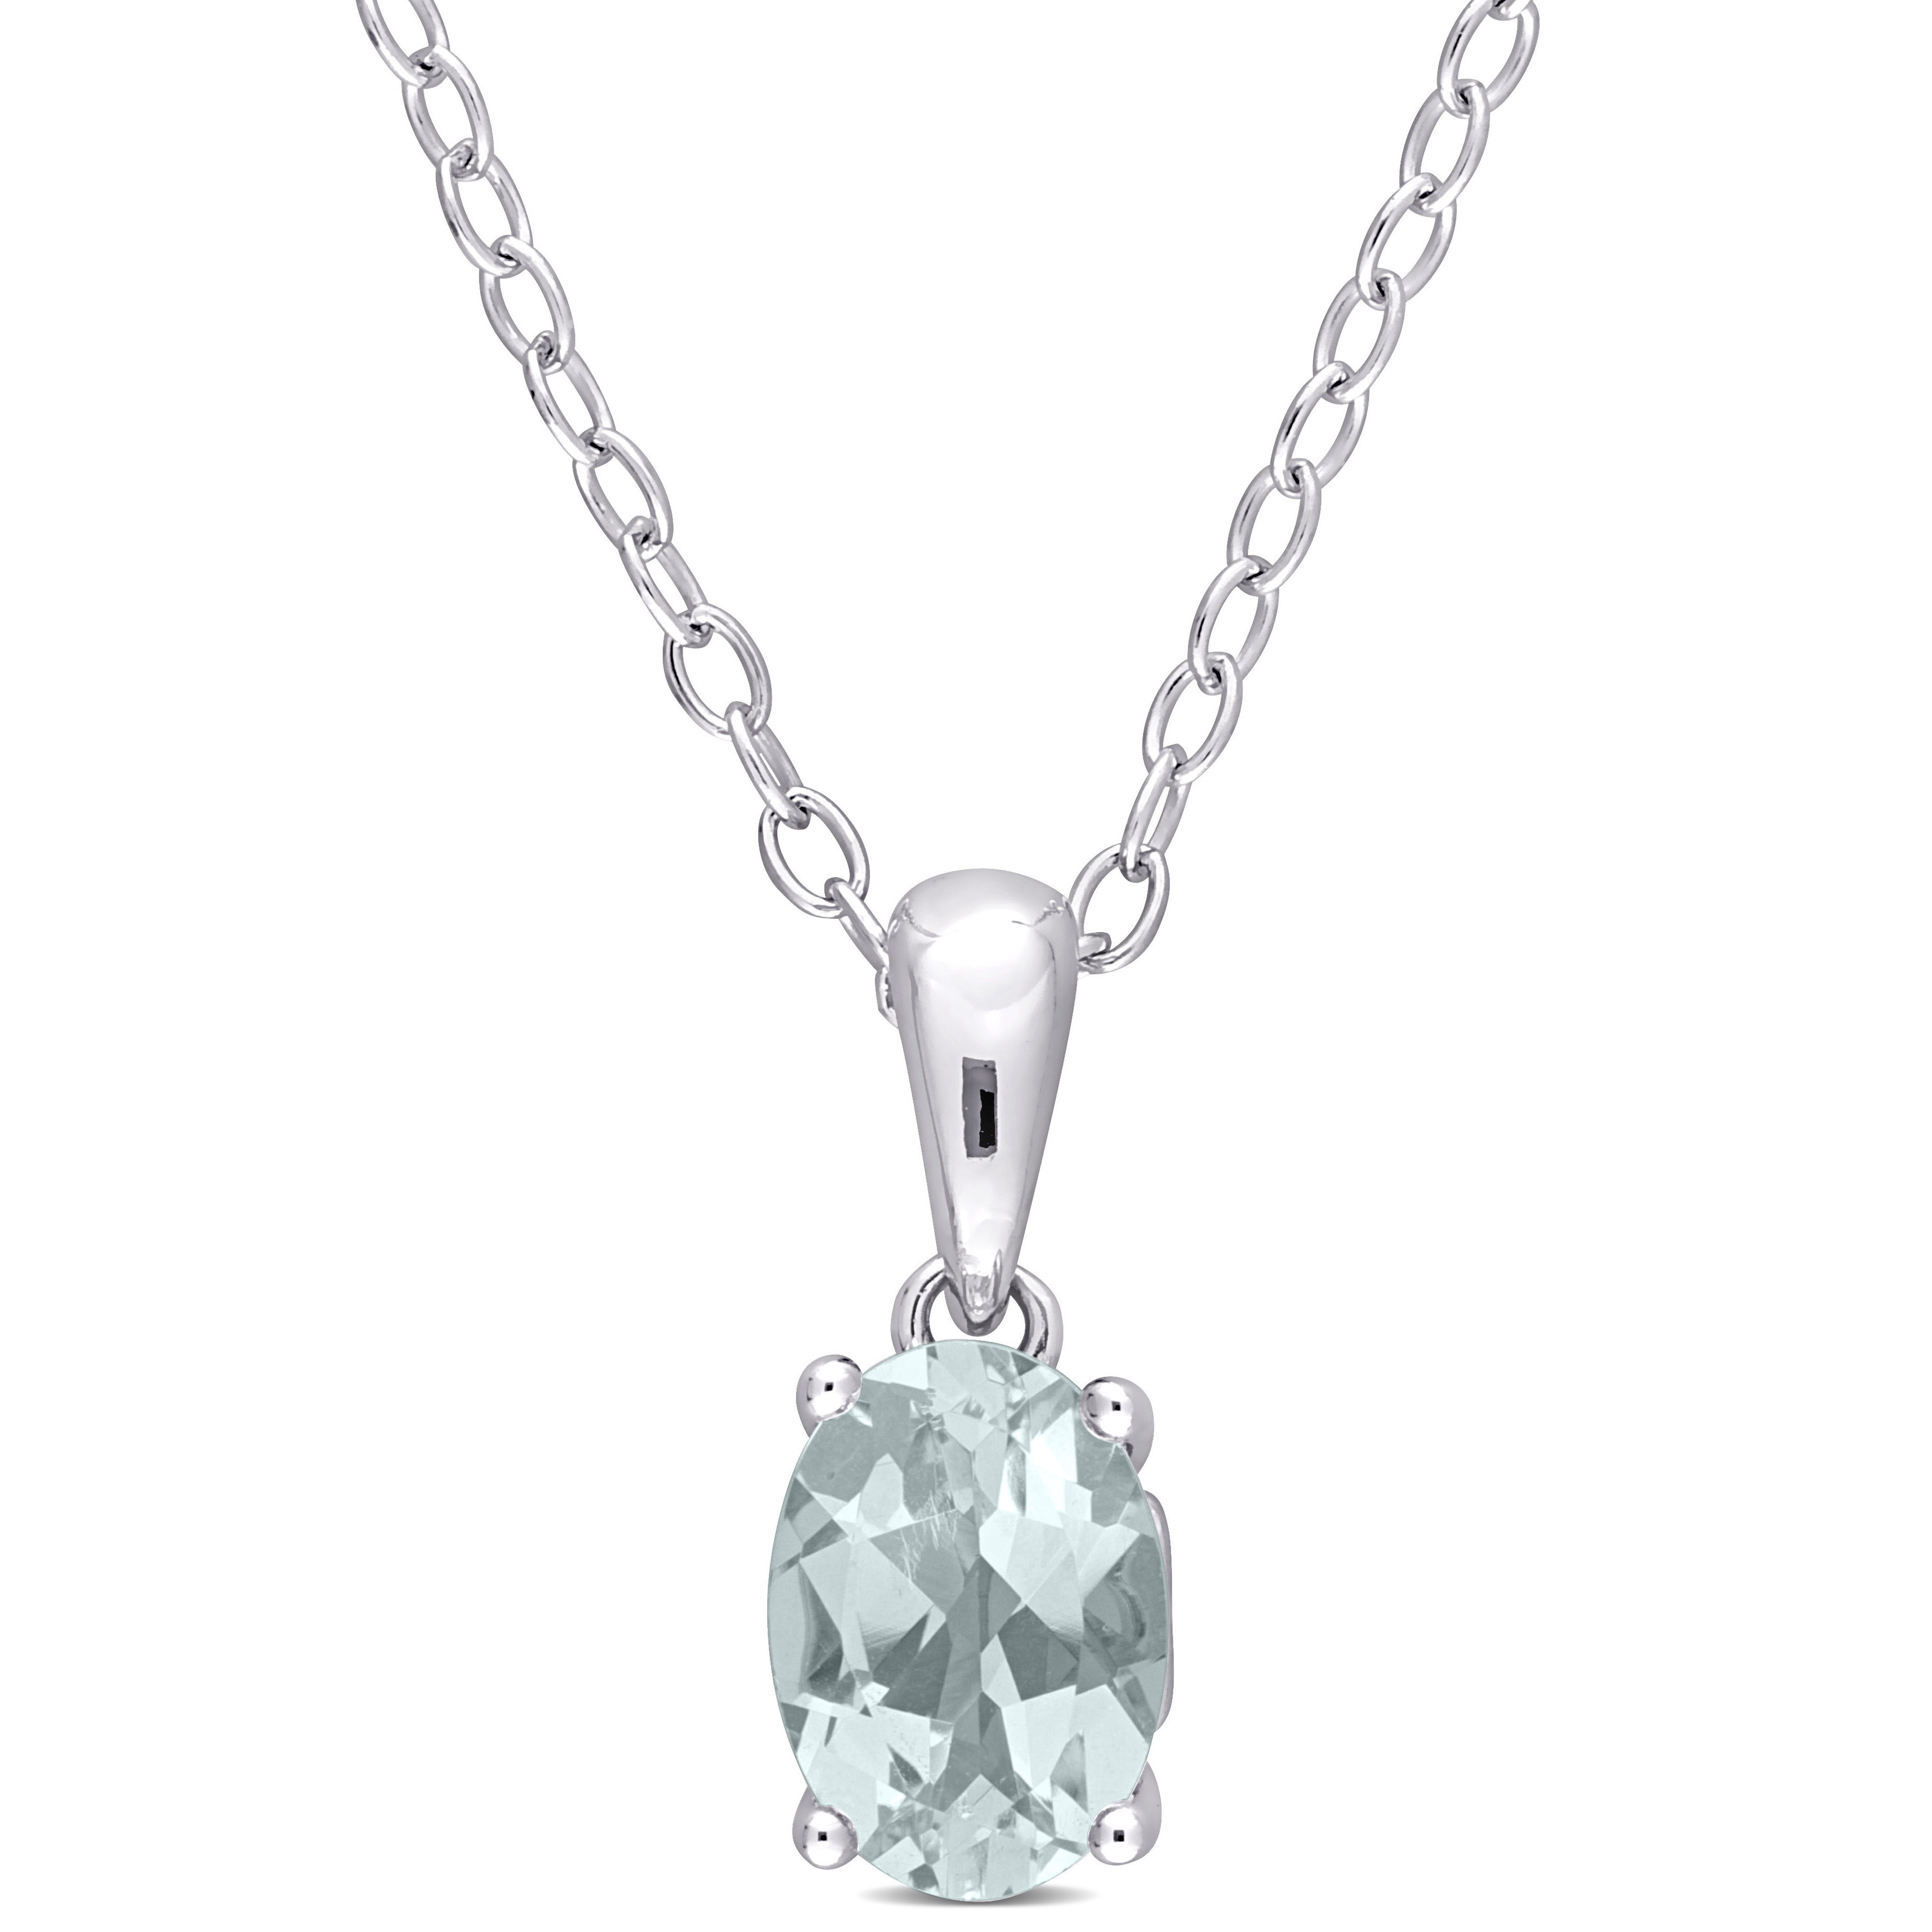 5/8 CT TGW Oval Aquamarine Solitaire Heart Design Pendant with Chain in Sterling Silver - 18 in.